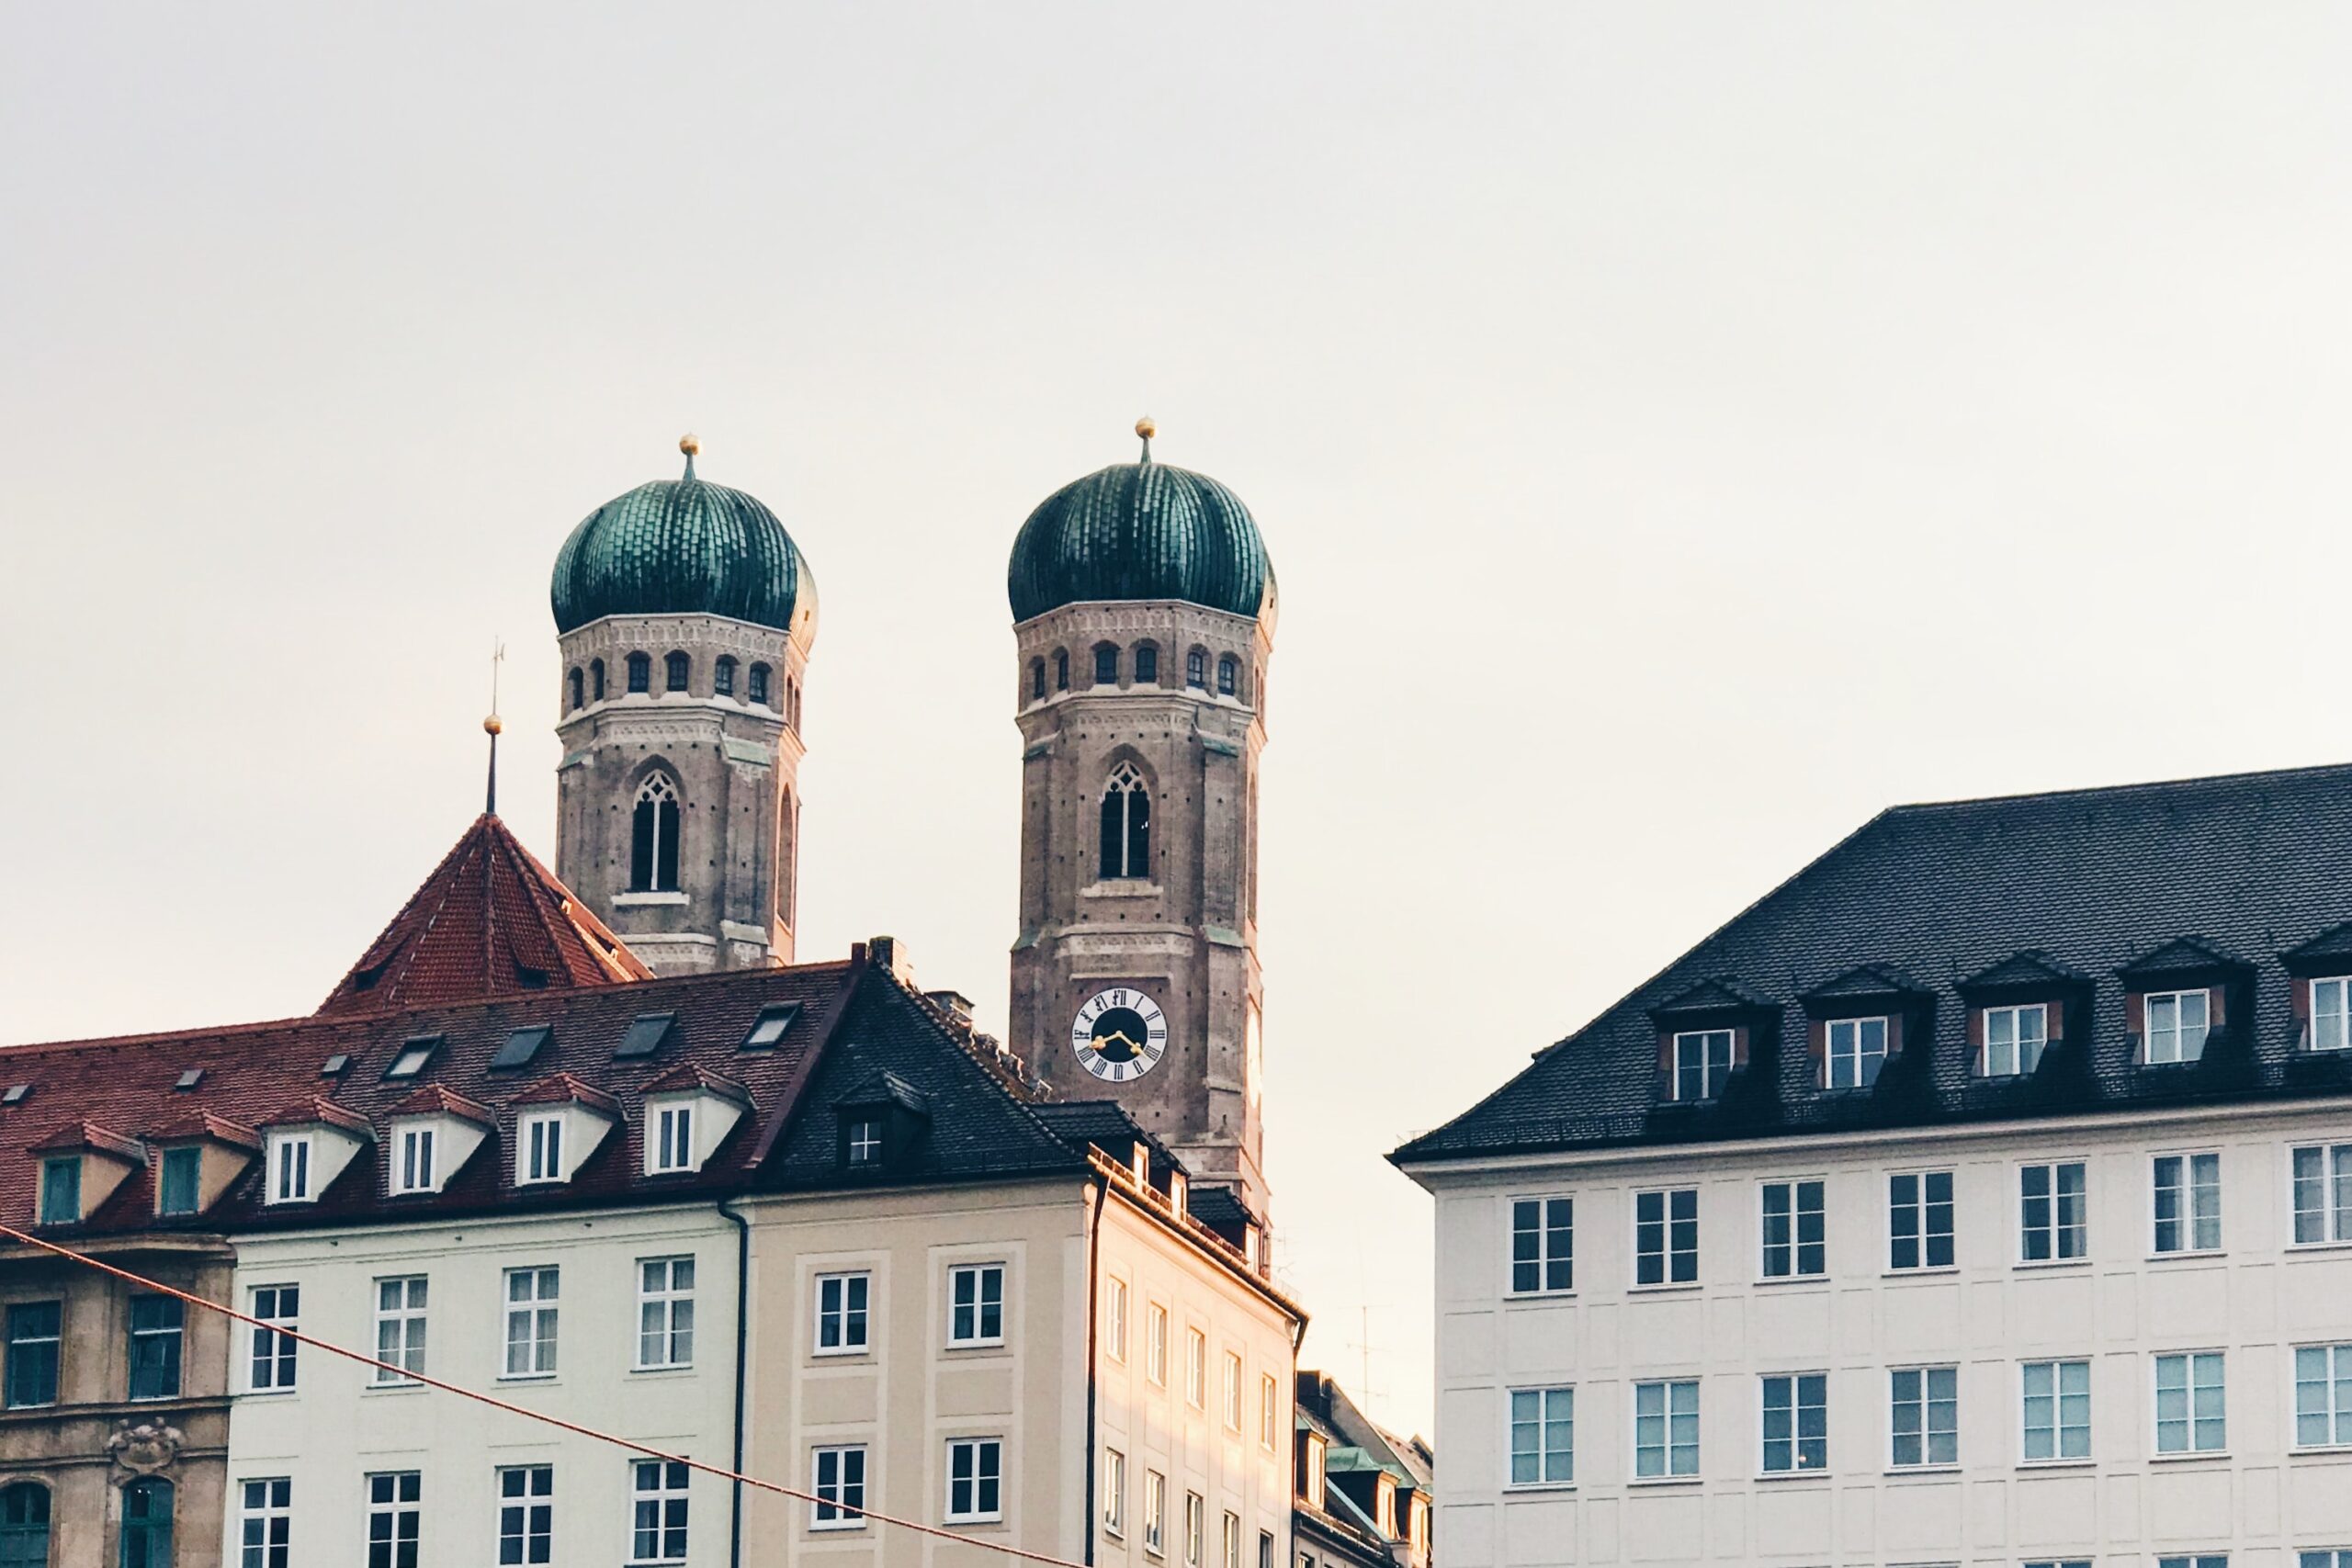 5 cities for sightseeing and other things to do in Germany @GermanyTourism